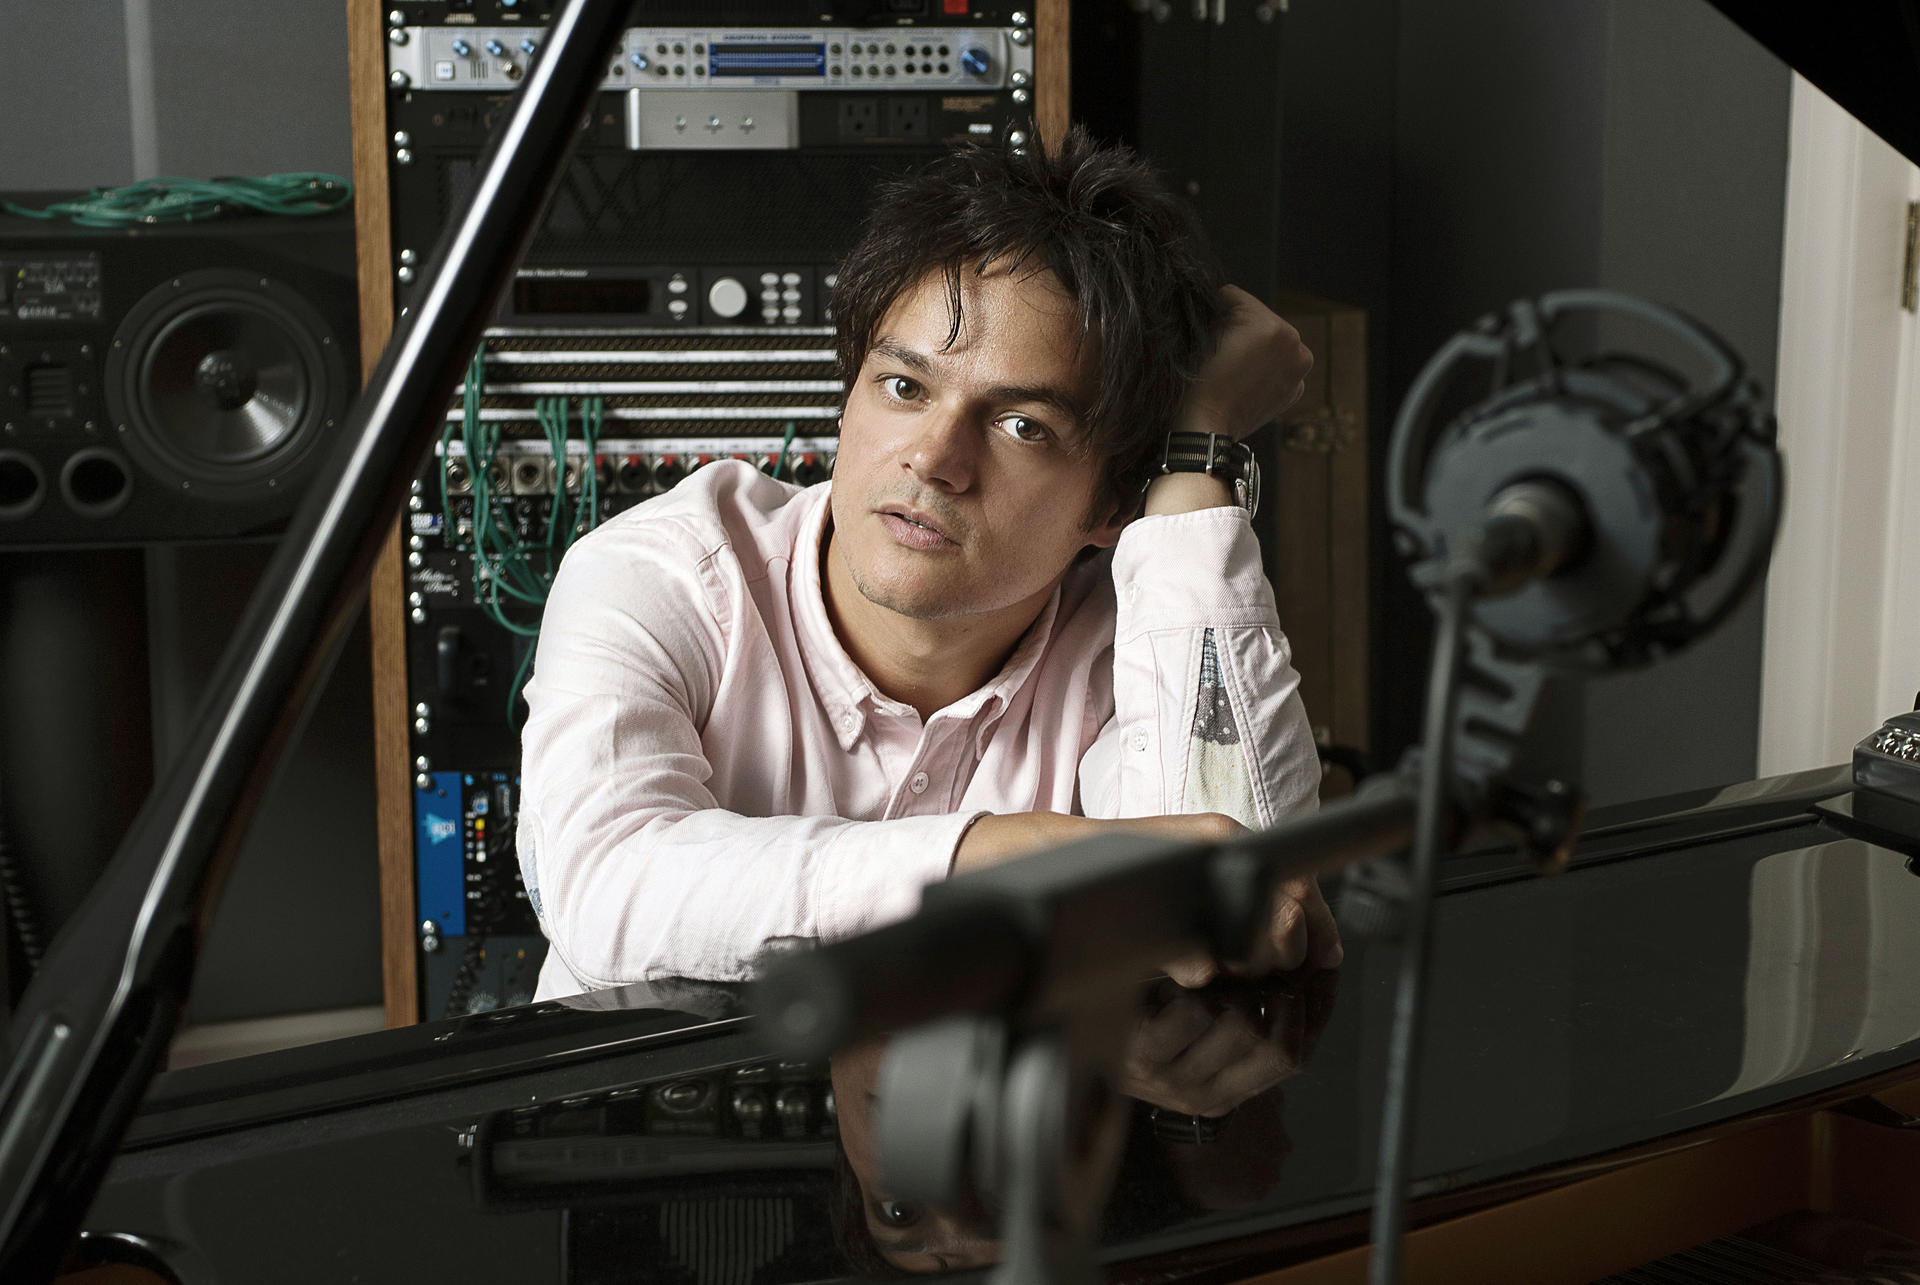 Jamie Cullum's new album features interpretations of jazz standards and jazz-style takes on unexpected songs. Photo: AP